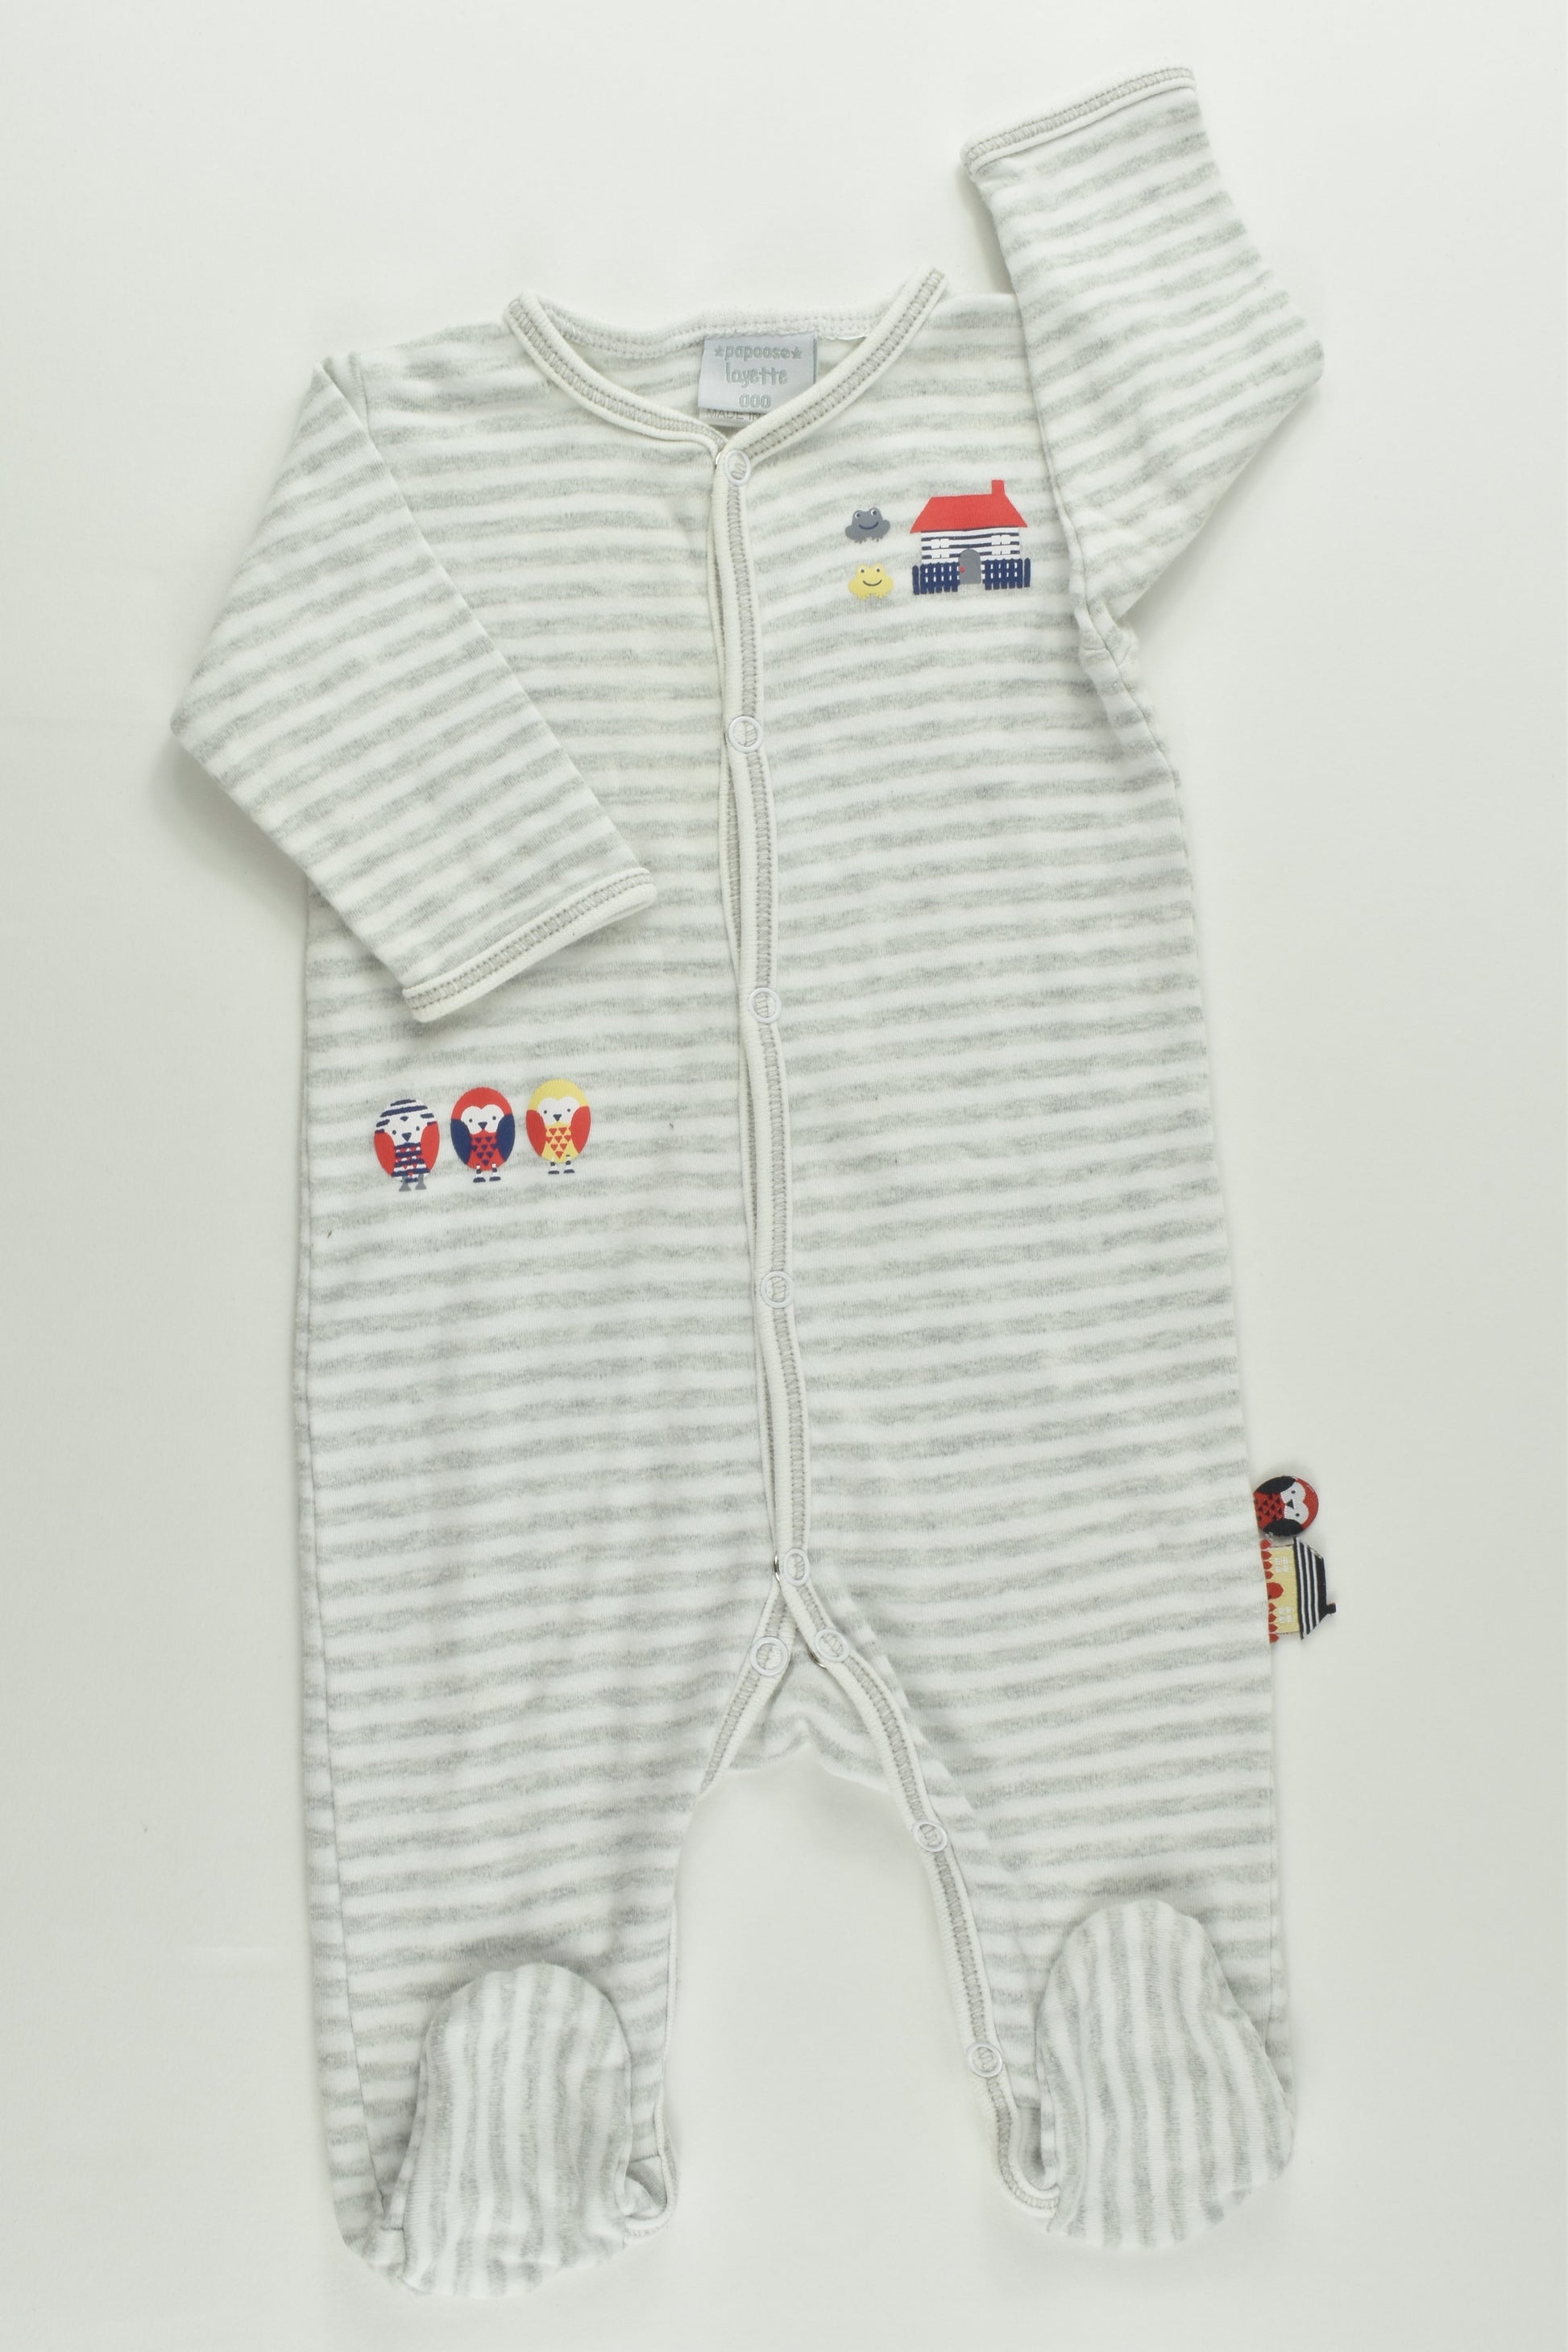 Papoose Size 000 Owls Striped Footed Romper